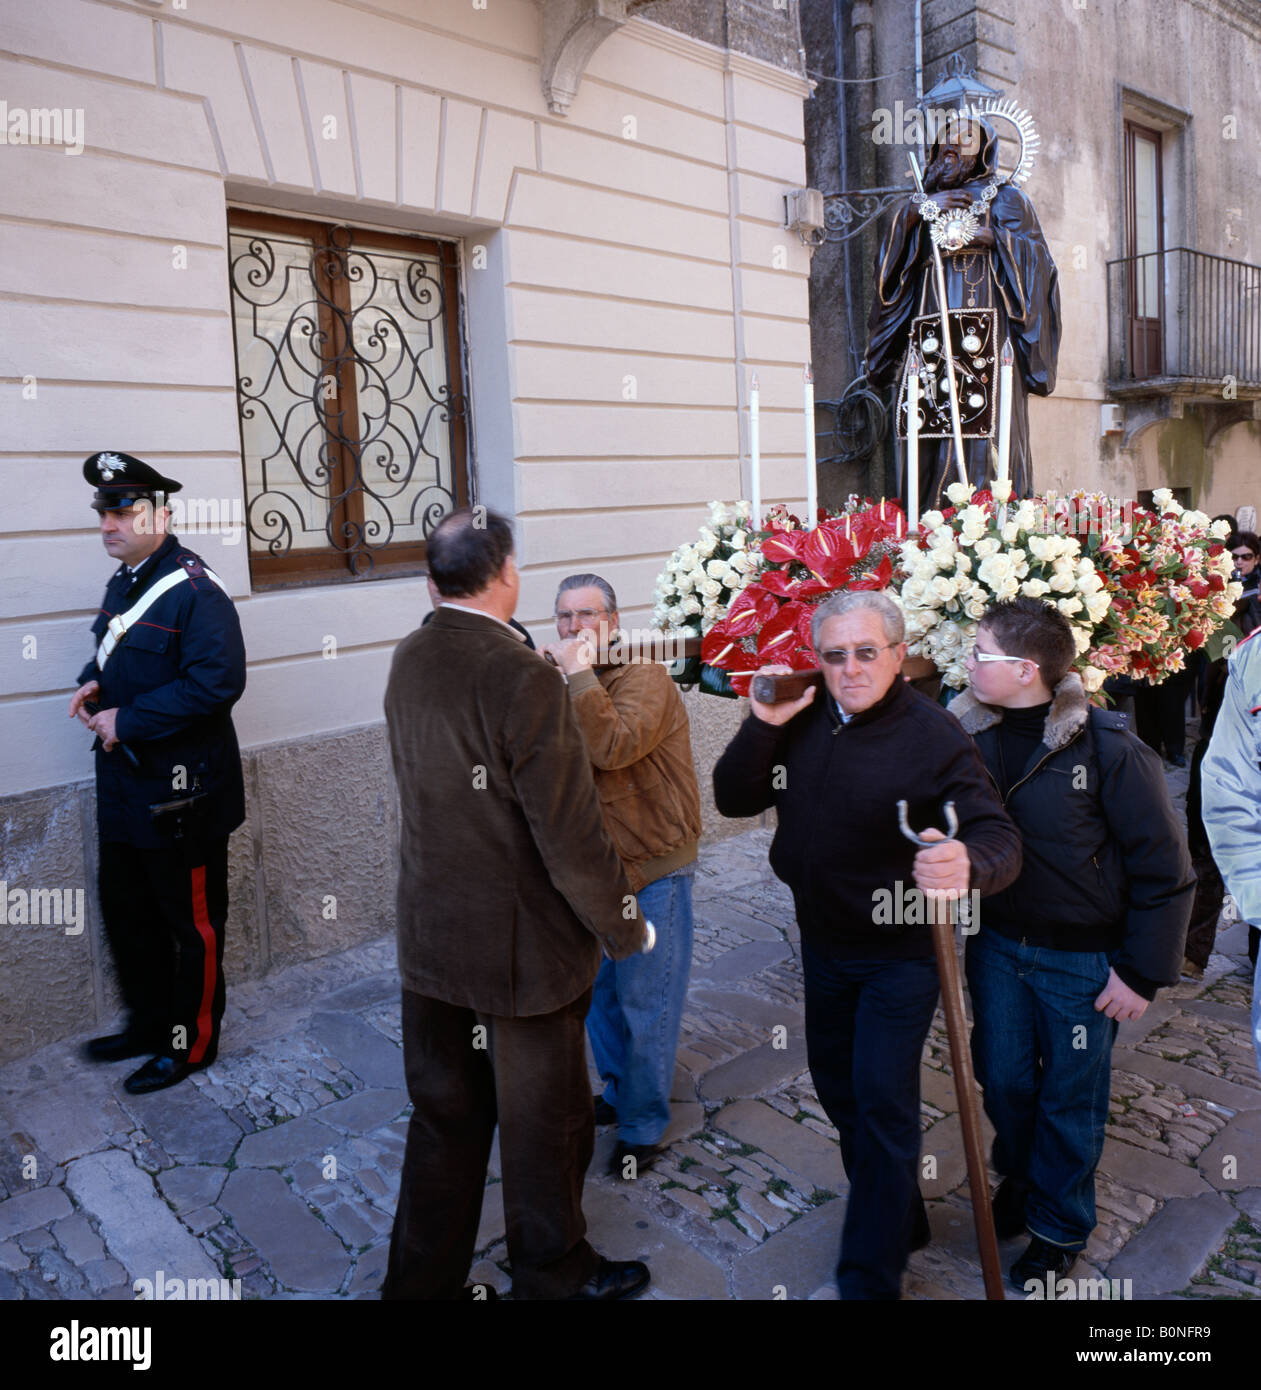 Procession of local people carrying an effigy of Saint Francis of Paola, Erice Sicily, Italy. EU. Stock Photo